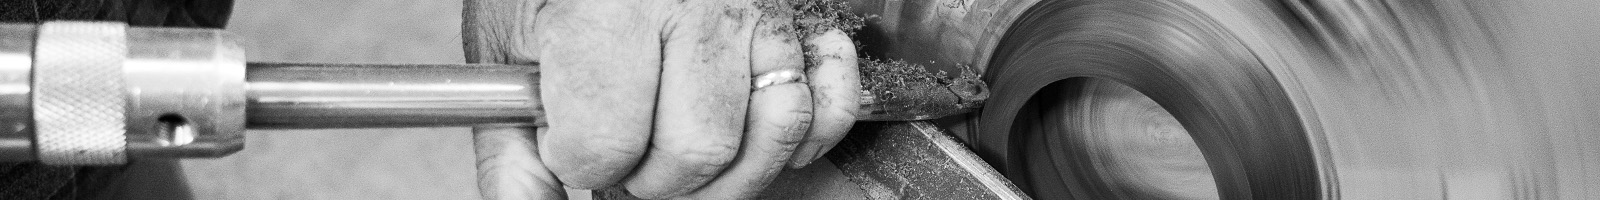 Black-and-white image of Terry Hill's hands holding chisel to bowl he's turning on lathe